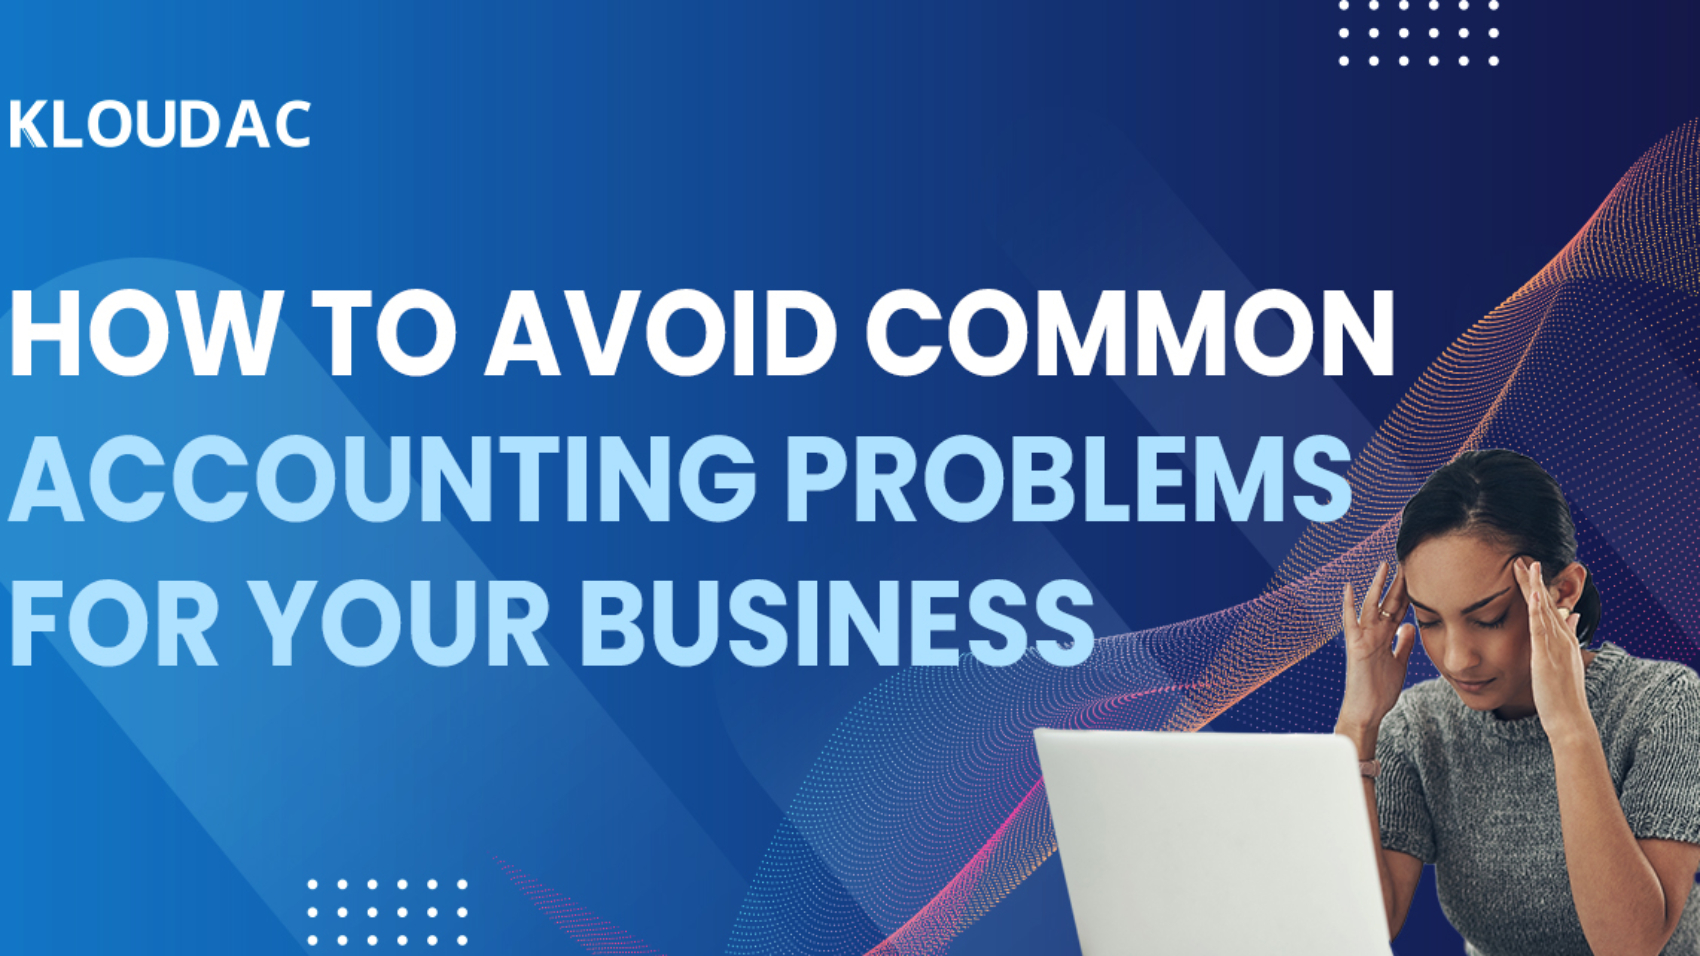 How to avoid common accounting problems for your business